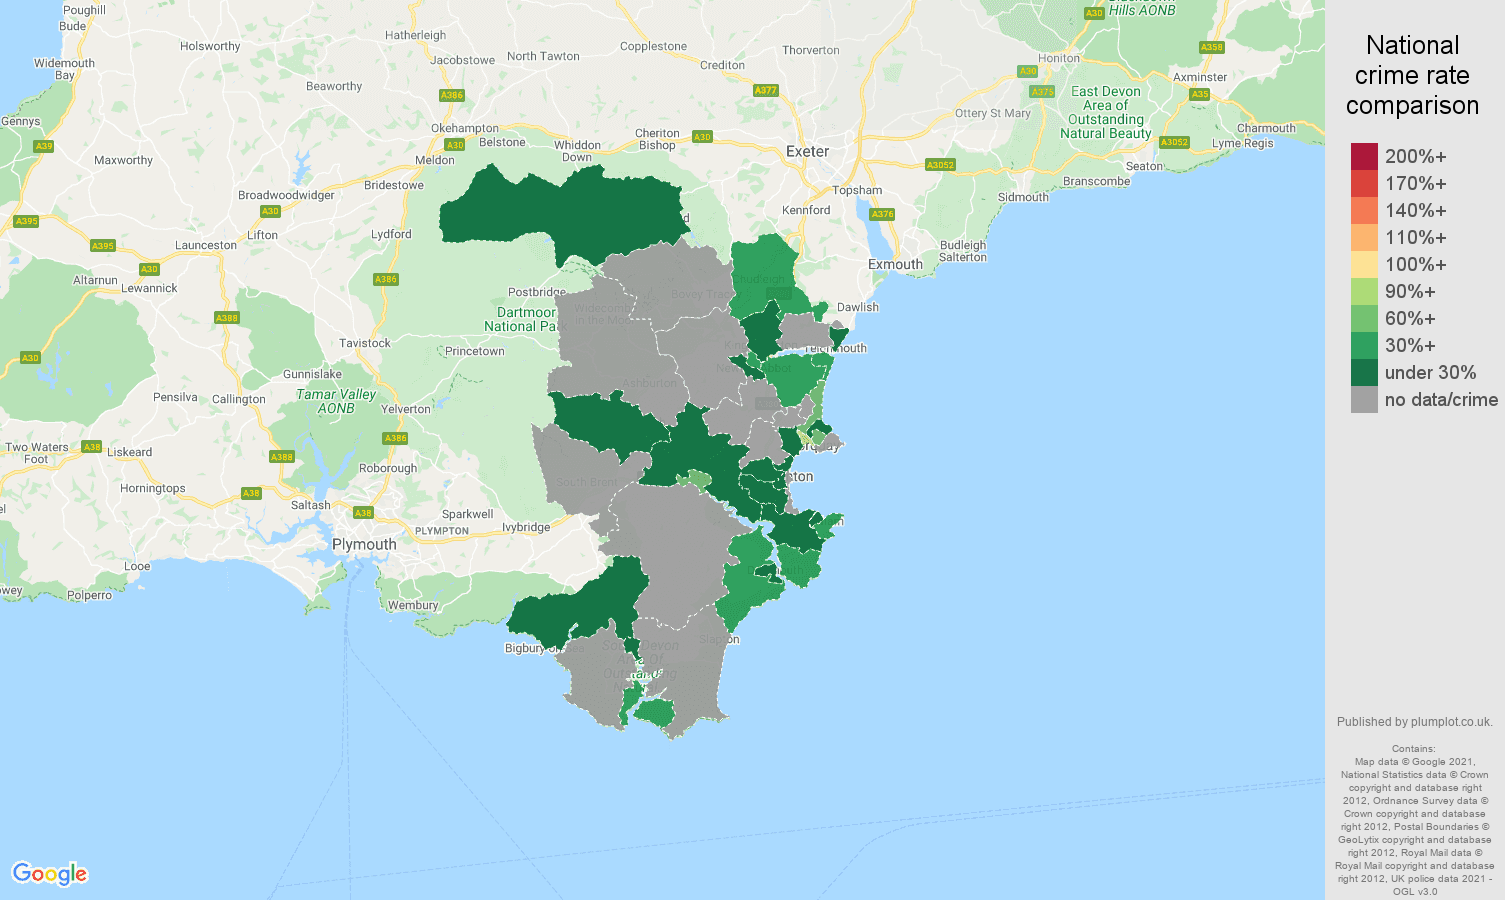 Torquay bicycle theft crime rate comparison map